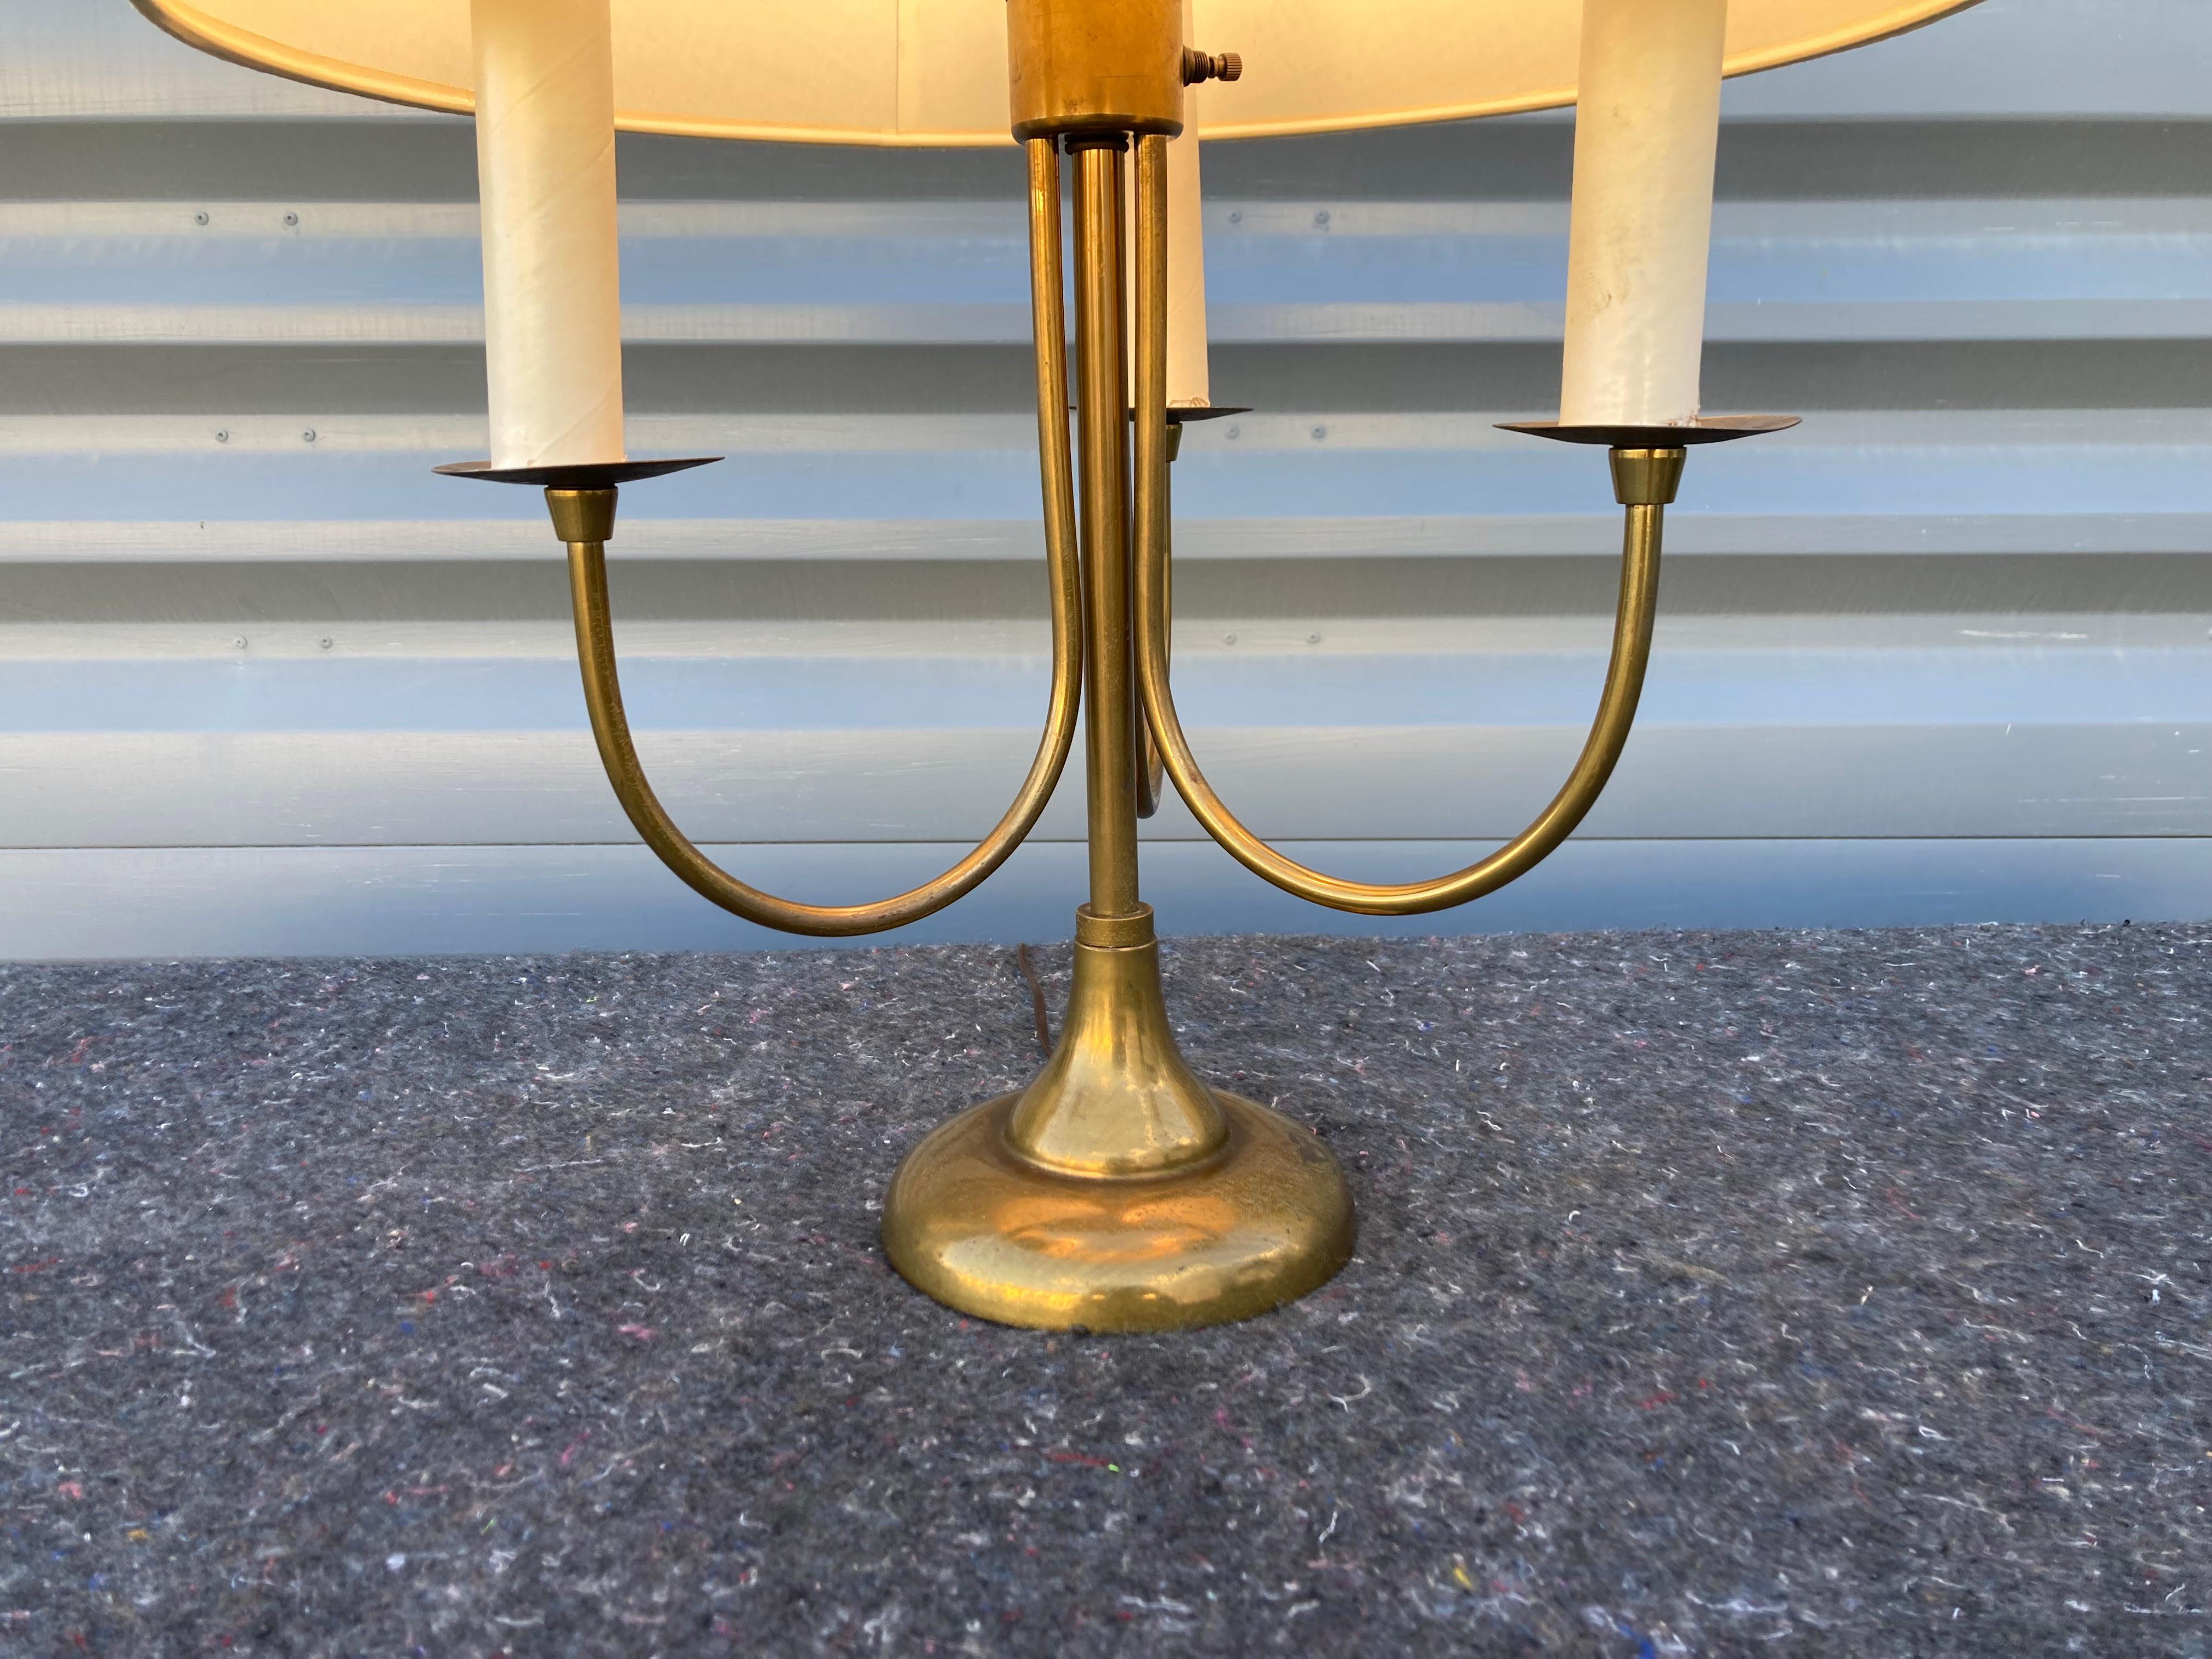 Pair of Mid-Century Modern Table Lamps, Brass, USA, 1950s For Sale 6